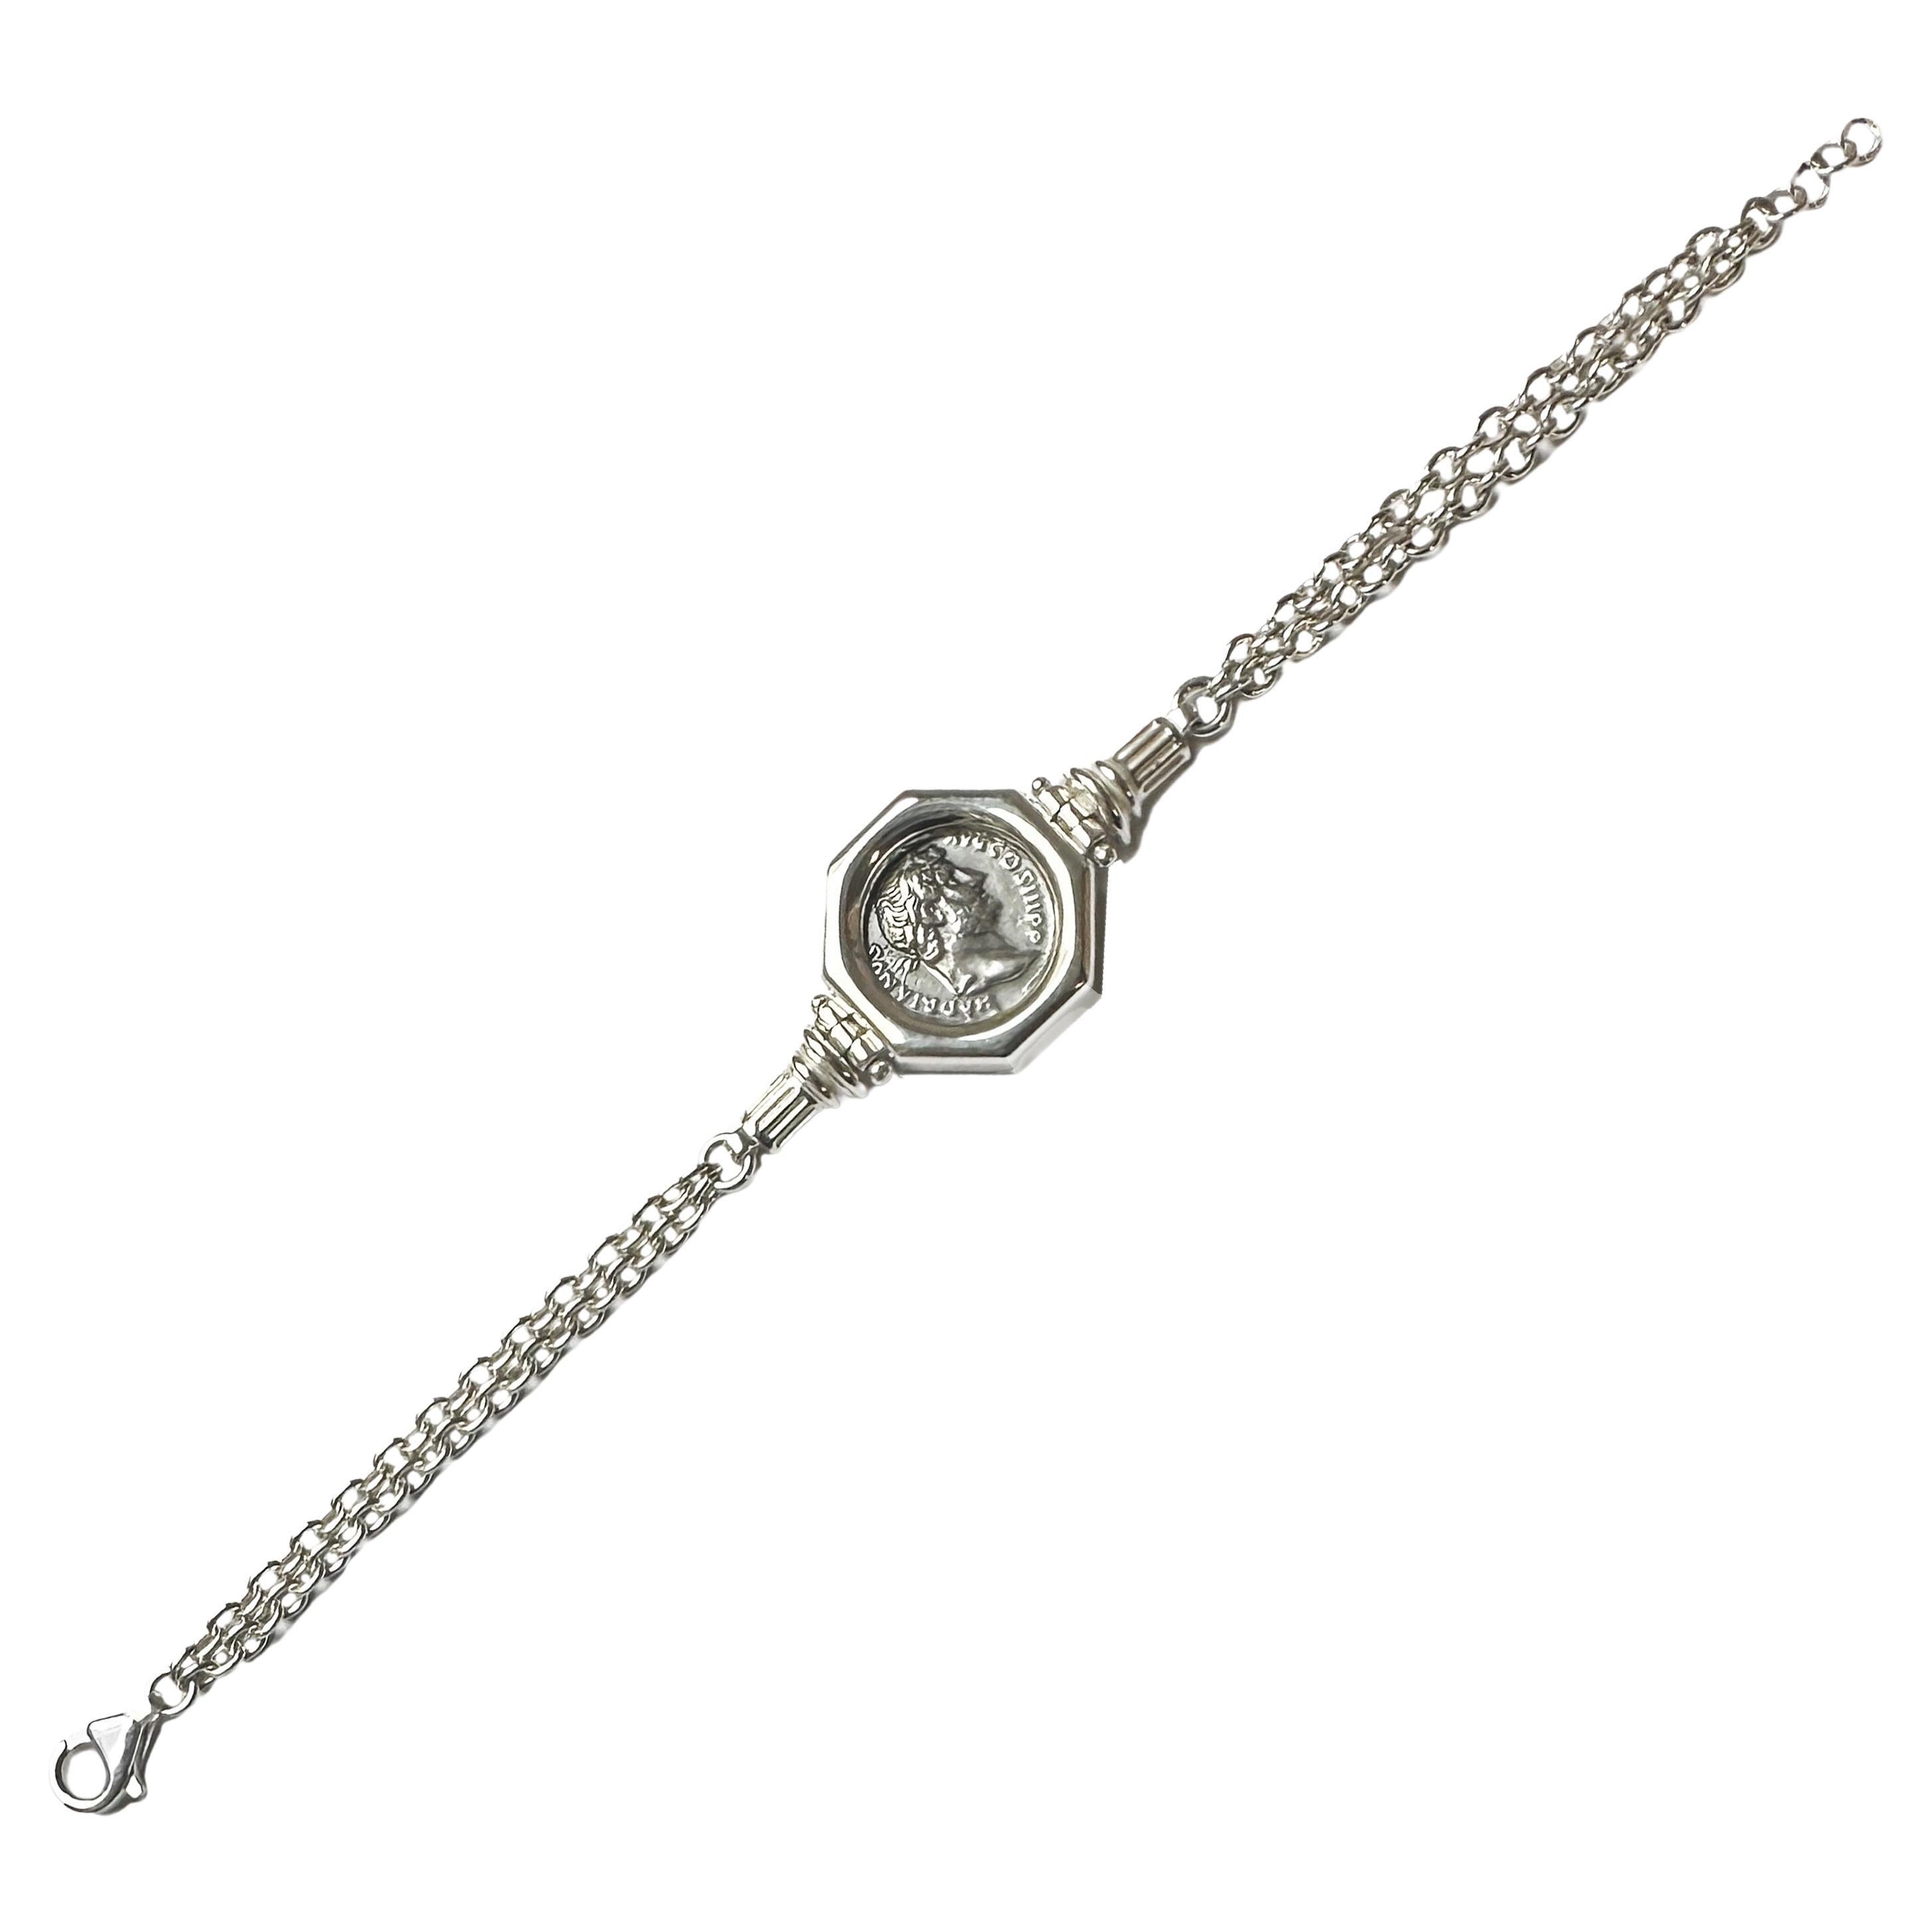 <p>An authentic Roman silver denarius from the 2nd century AD, depicting the Emperor Hadrian, has been set in this sterling silver bracelet, handmade by our goldsmiths. On the side, two graceful columns adorn the coin; on the back of the coin, we